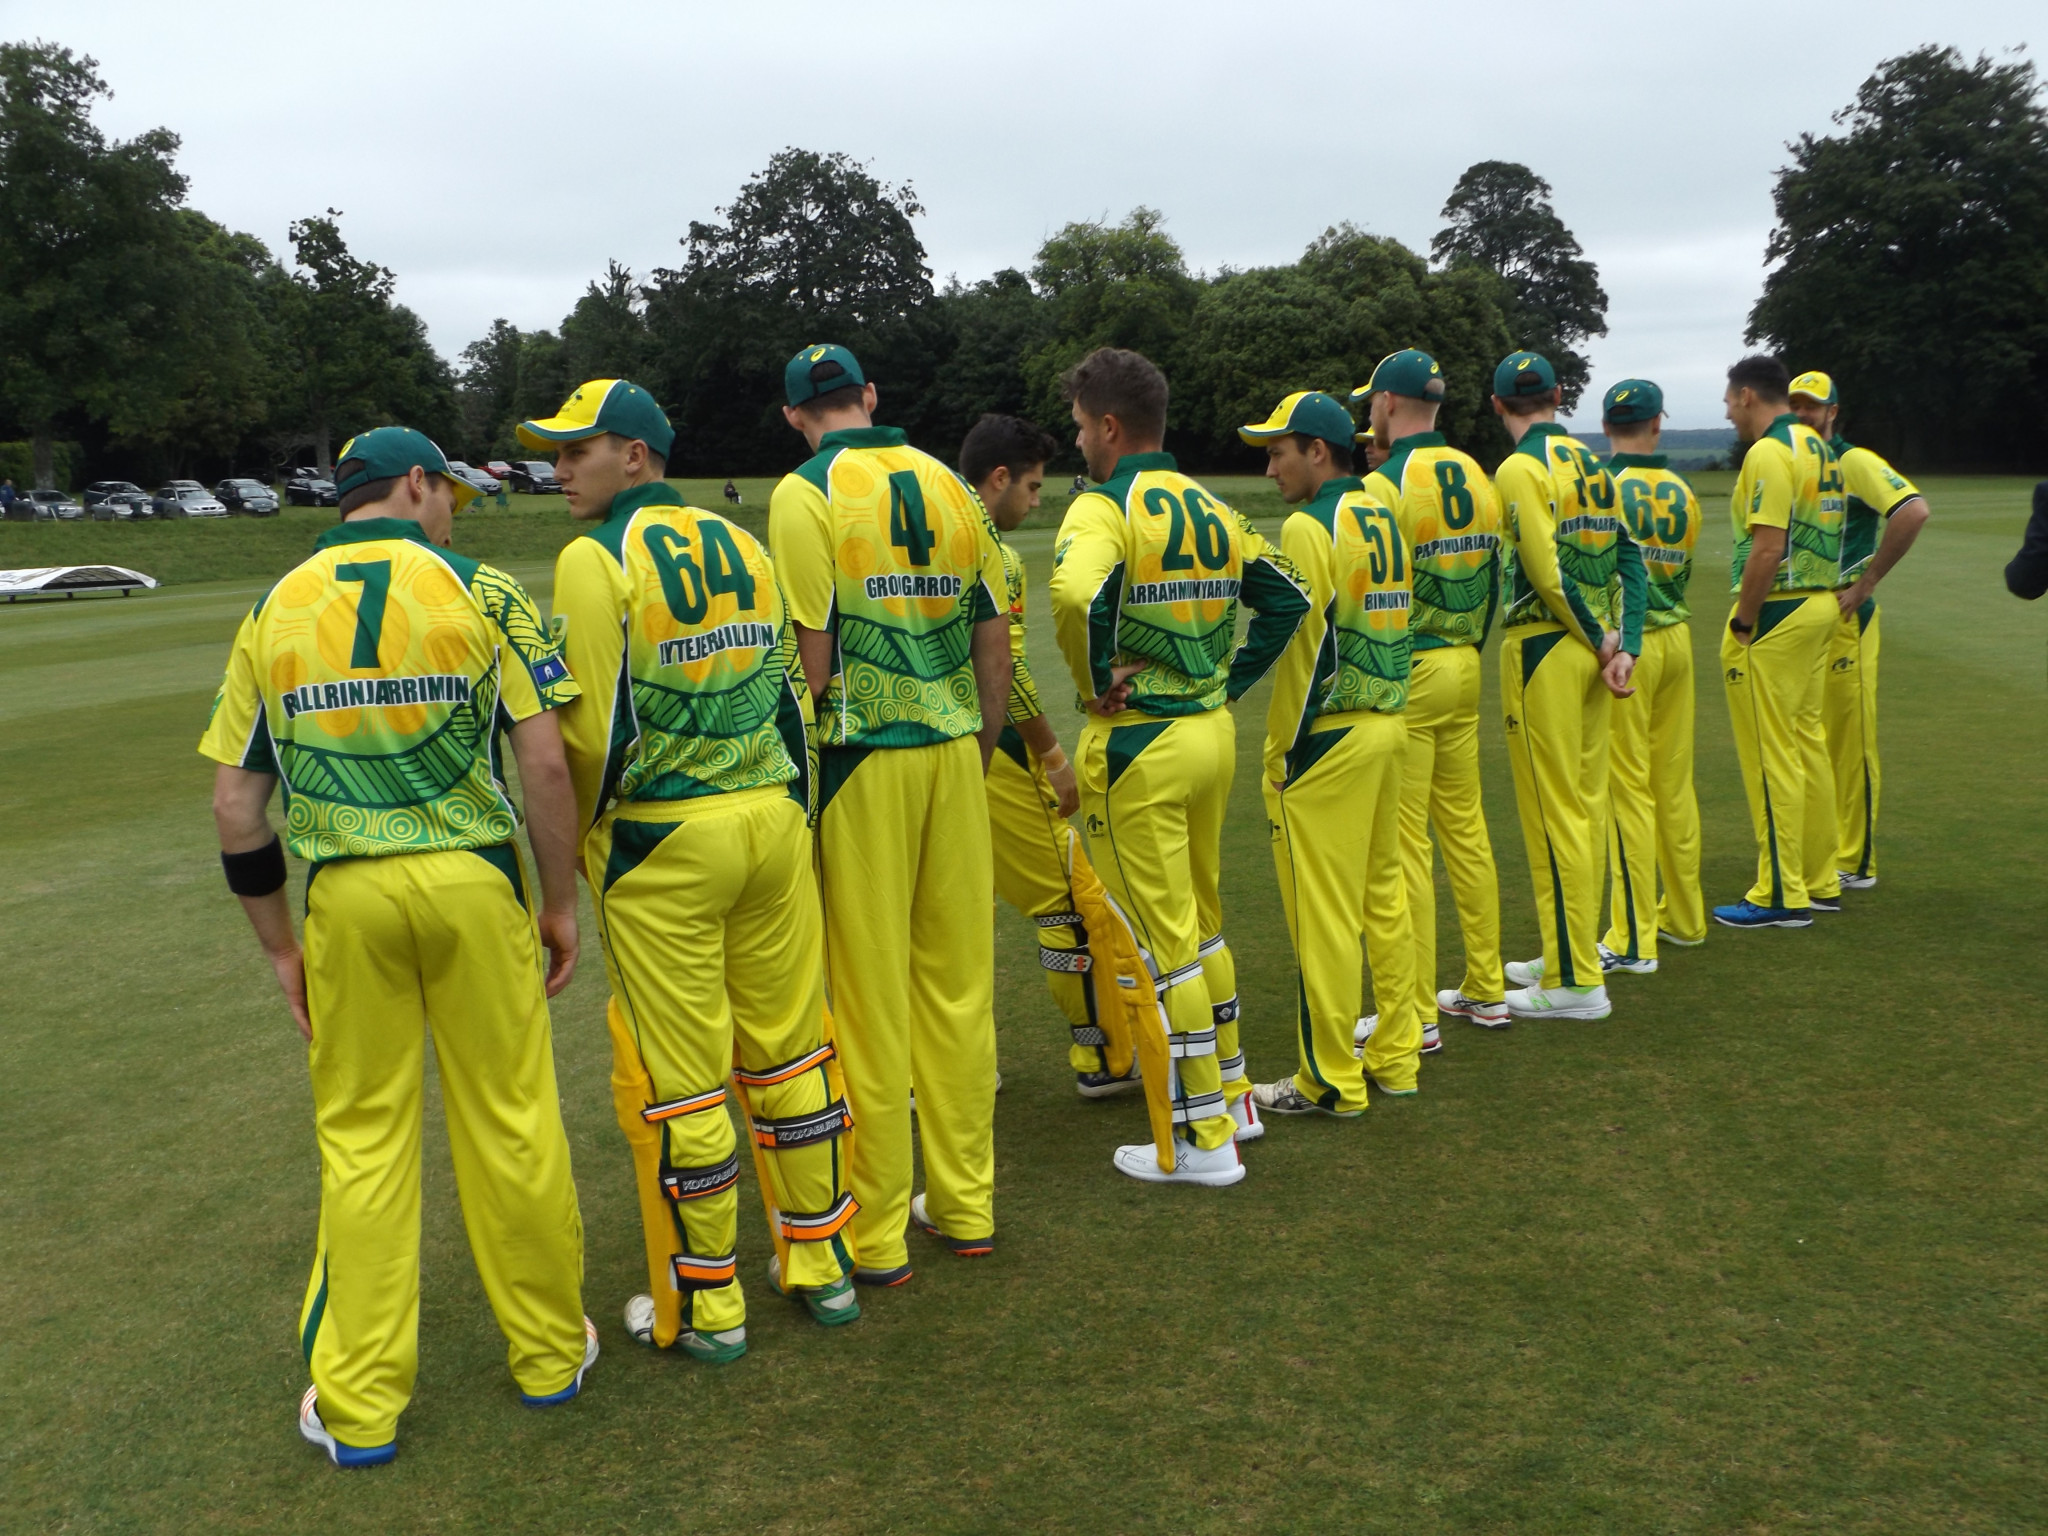 Australia's indigenous cricketers have begun their anniversary tour of England ©Phil Barker